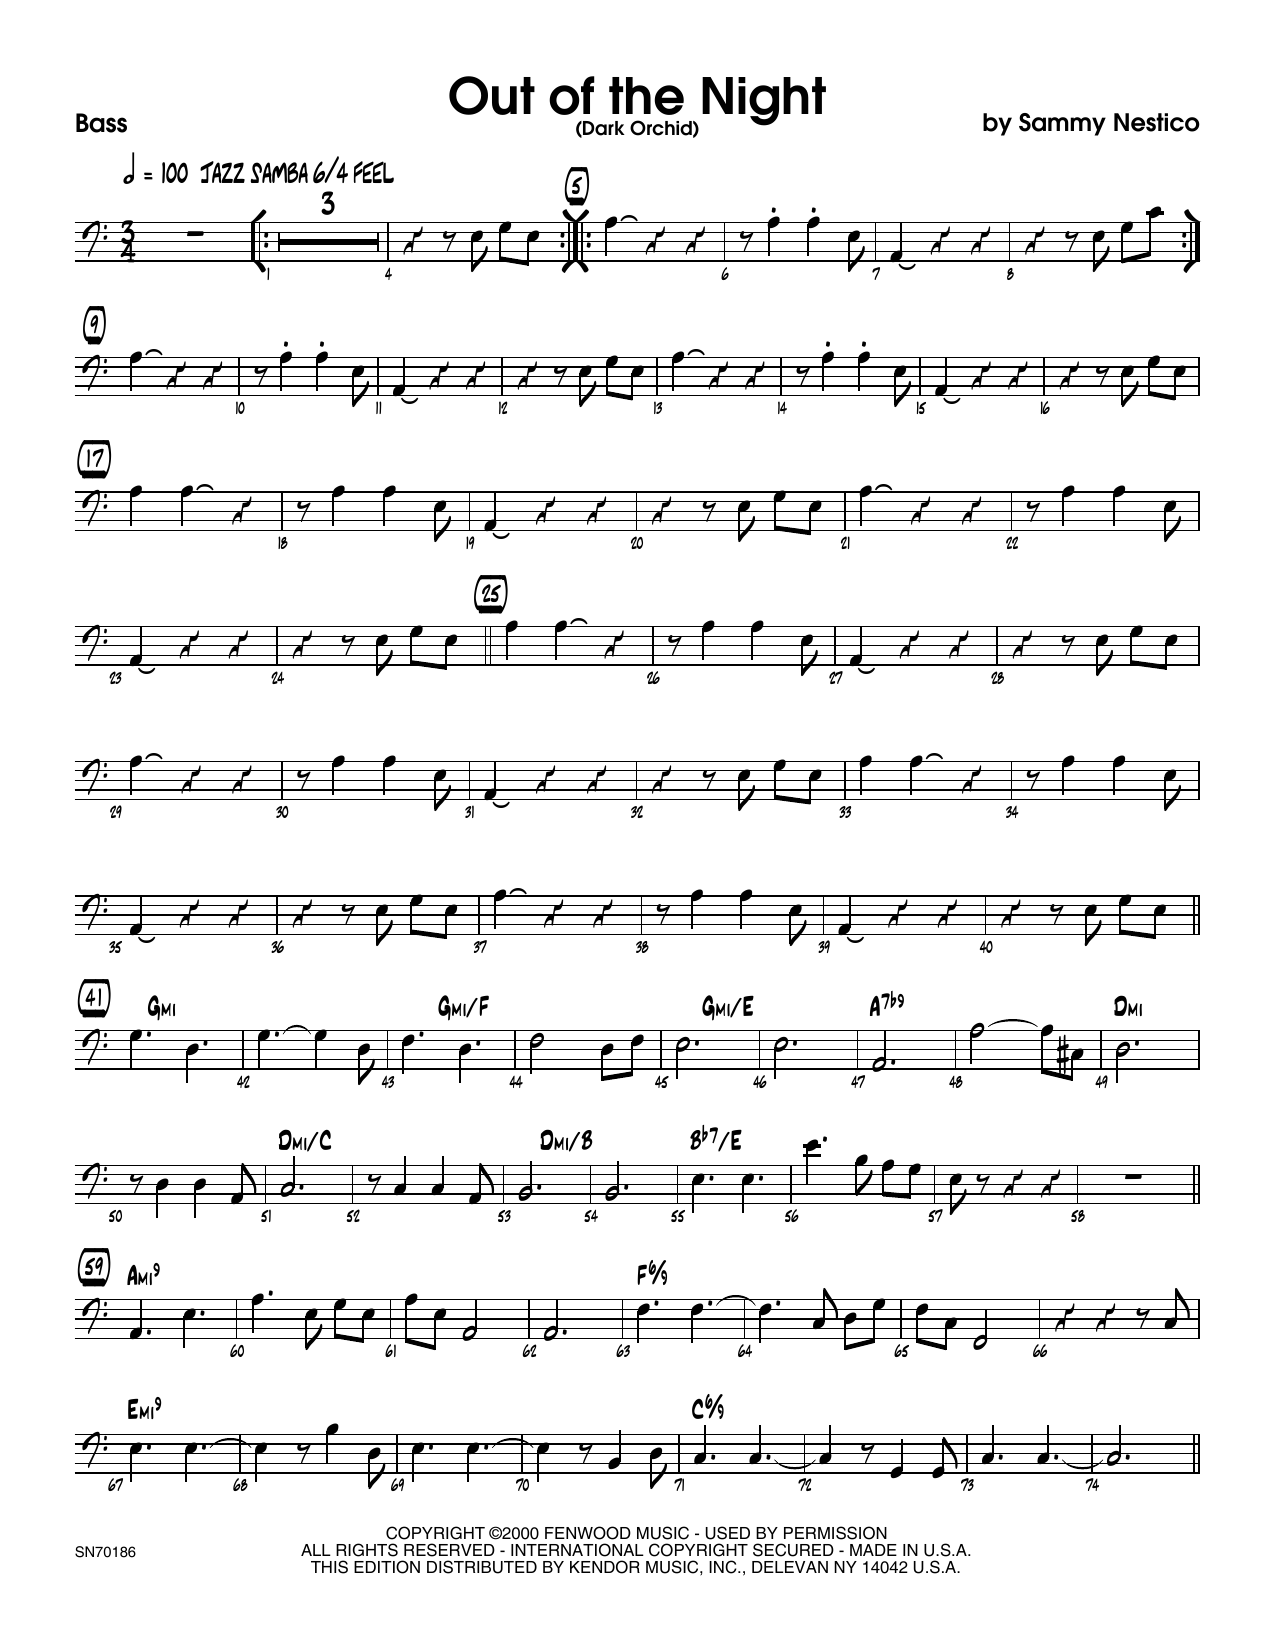 Download Sammy Nestico Out of the Night - Bass Sheet Music